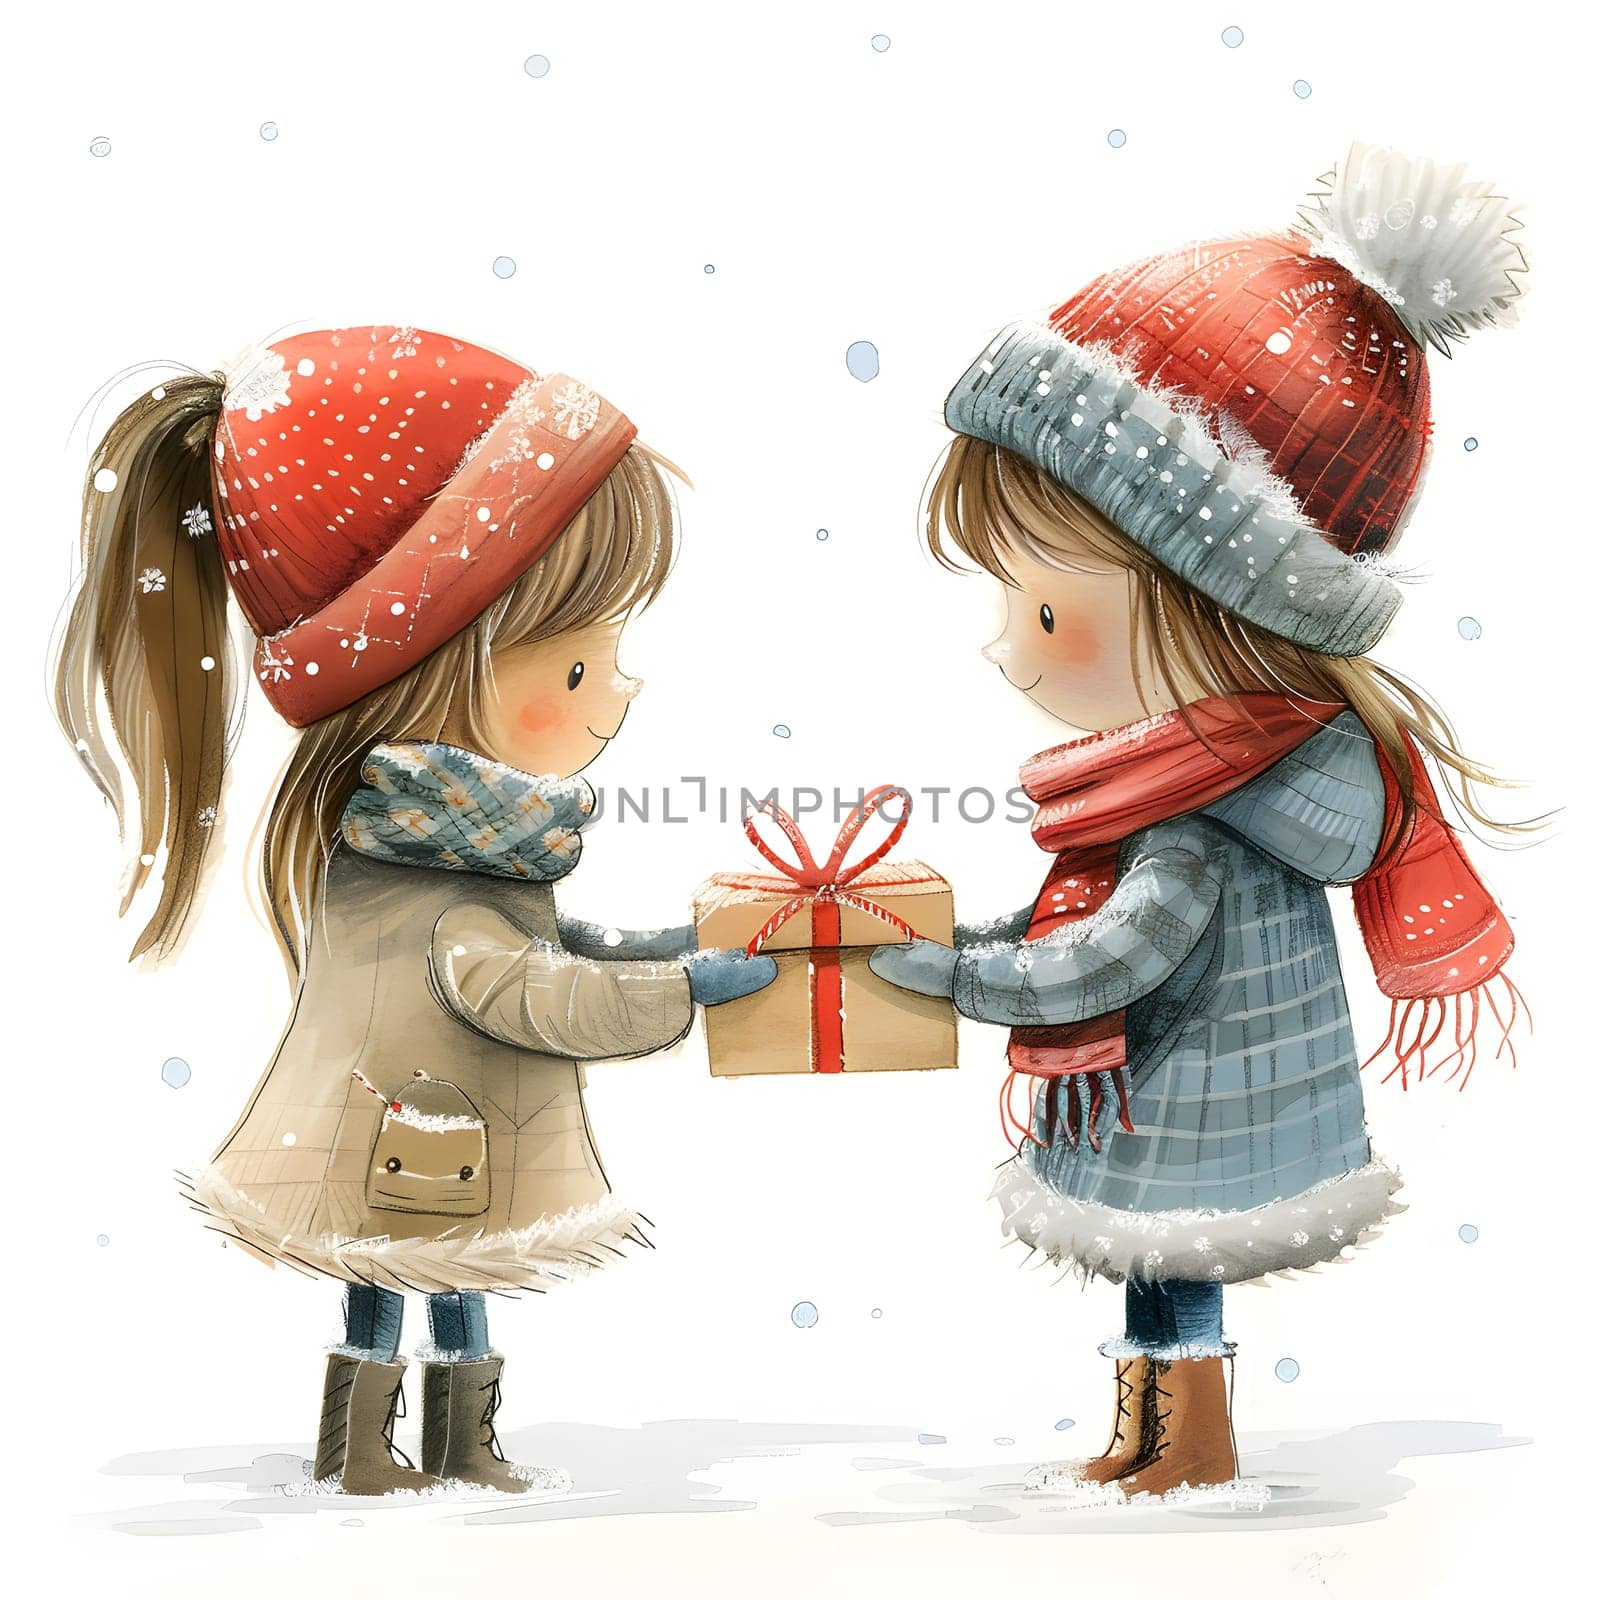 A little girl is sharing a gift with another little girl as a happy gesture. The gift is a winter cap with a cartoon illustration. Children sharing art and joy